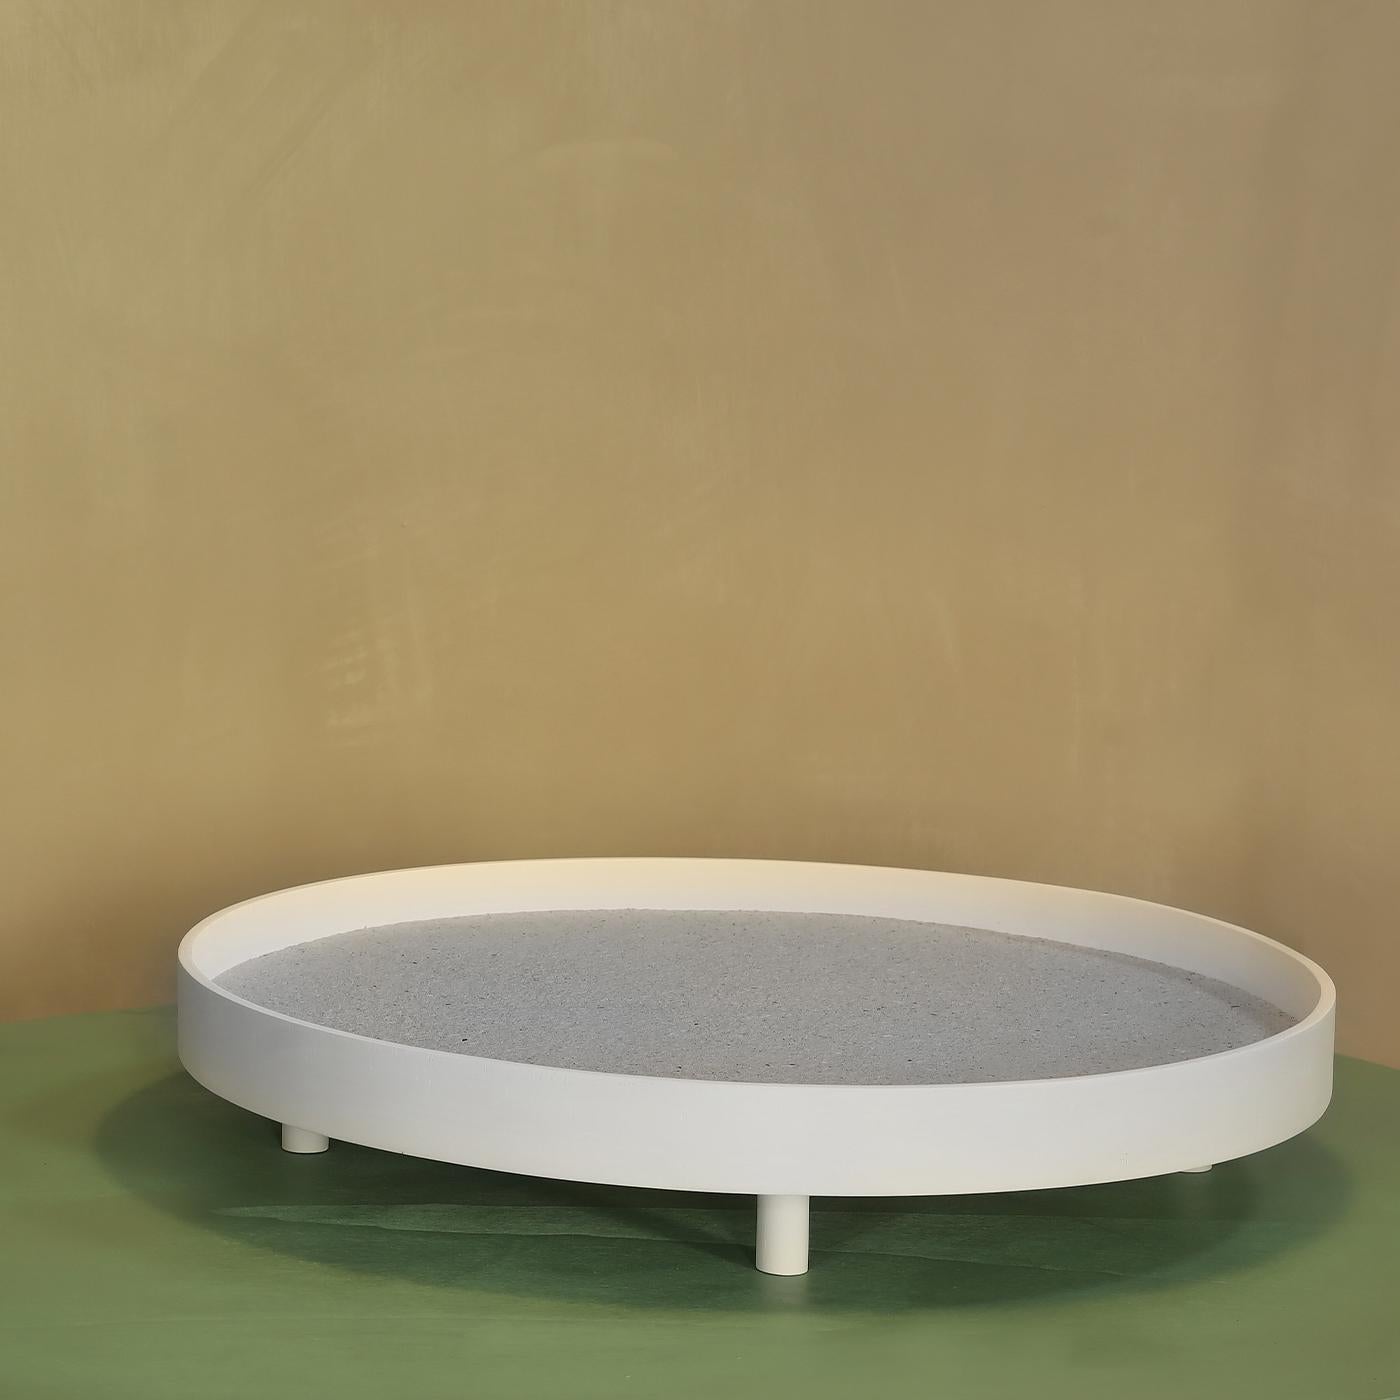 An elegant solution to serve afternoon tea or house permanently-displayed collectibles, this round tray was conceived with sustainability in mind, coherently with the brand's philosophy. The white lacquer used to hand-paint the minimalist frame in